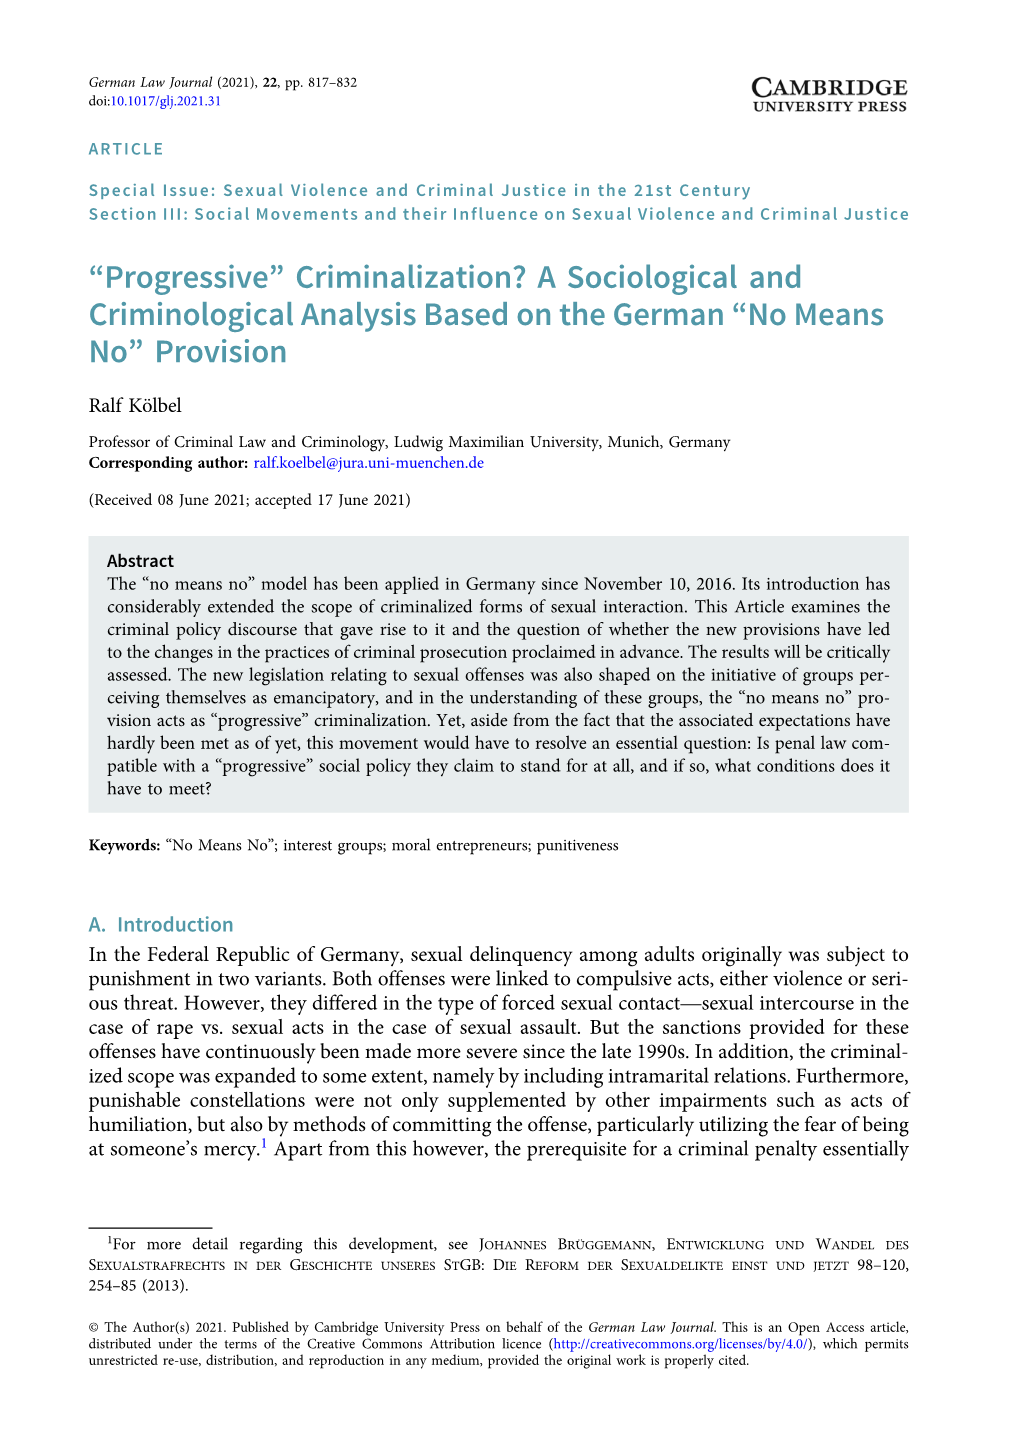 “Progressive” Criminalization? a Sociological and Criminological Analysis Based on the German “No Means No” Provision